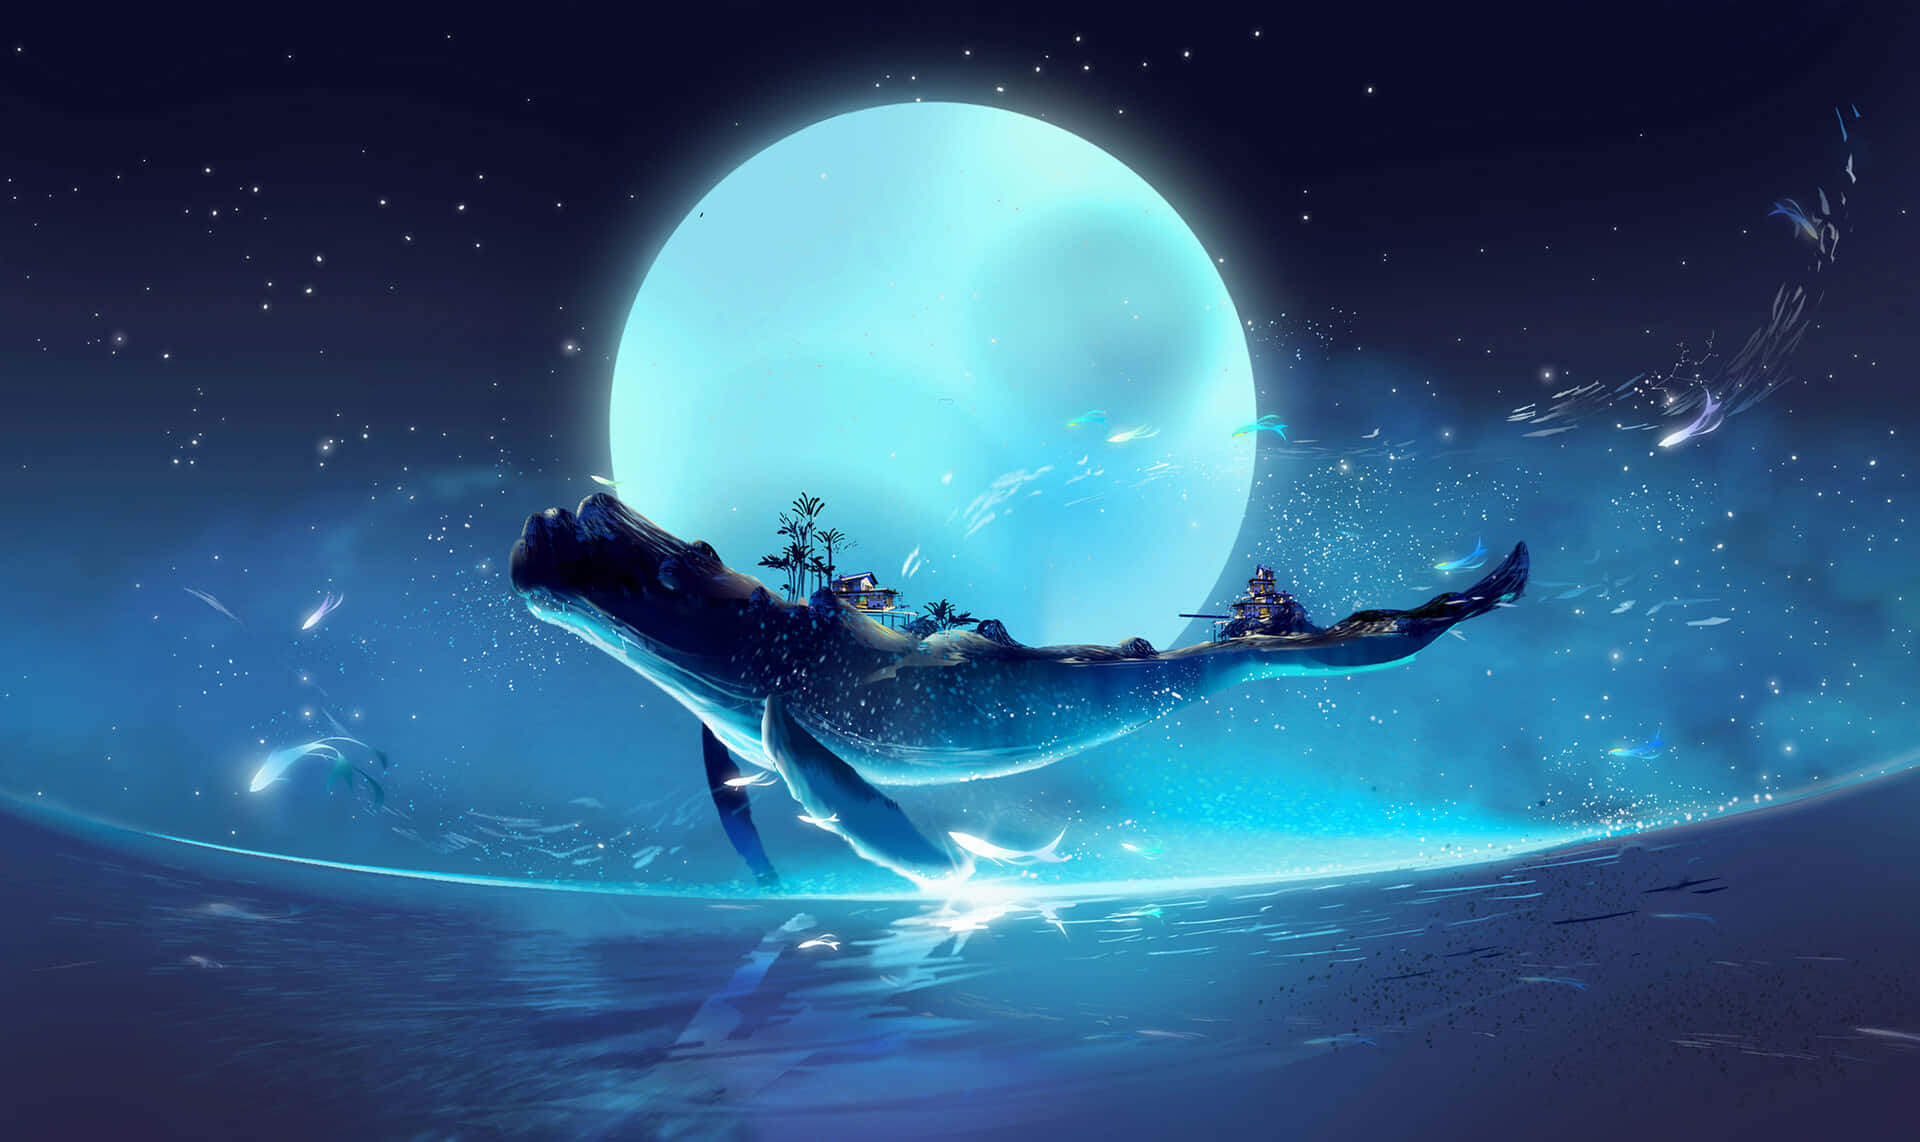 Download Blue Whale Moon Jump Ocean Fantasy Art Picture | Wallpapers.com